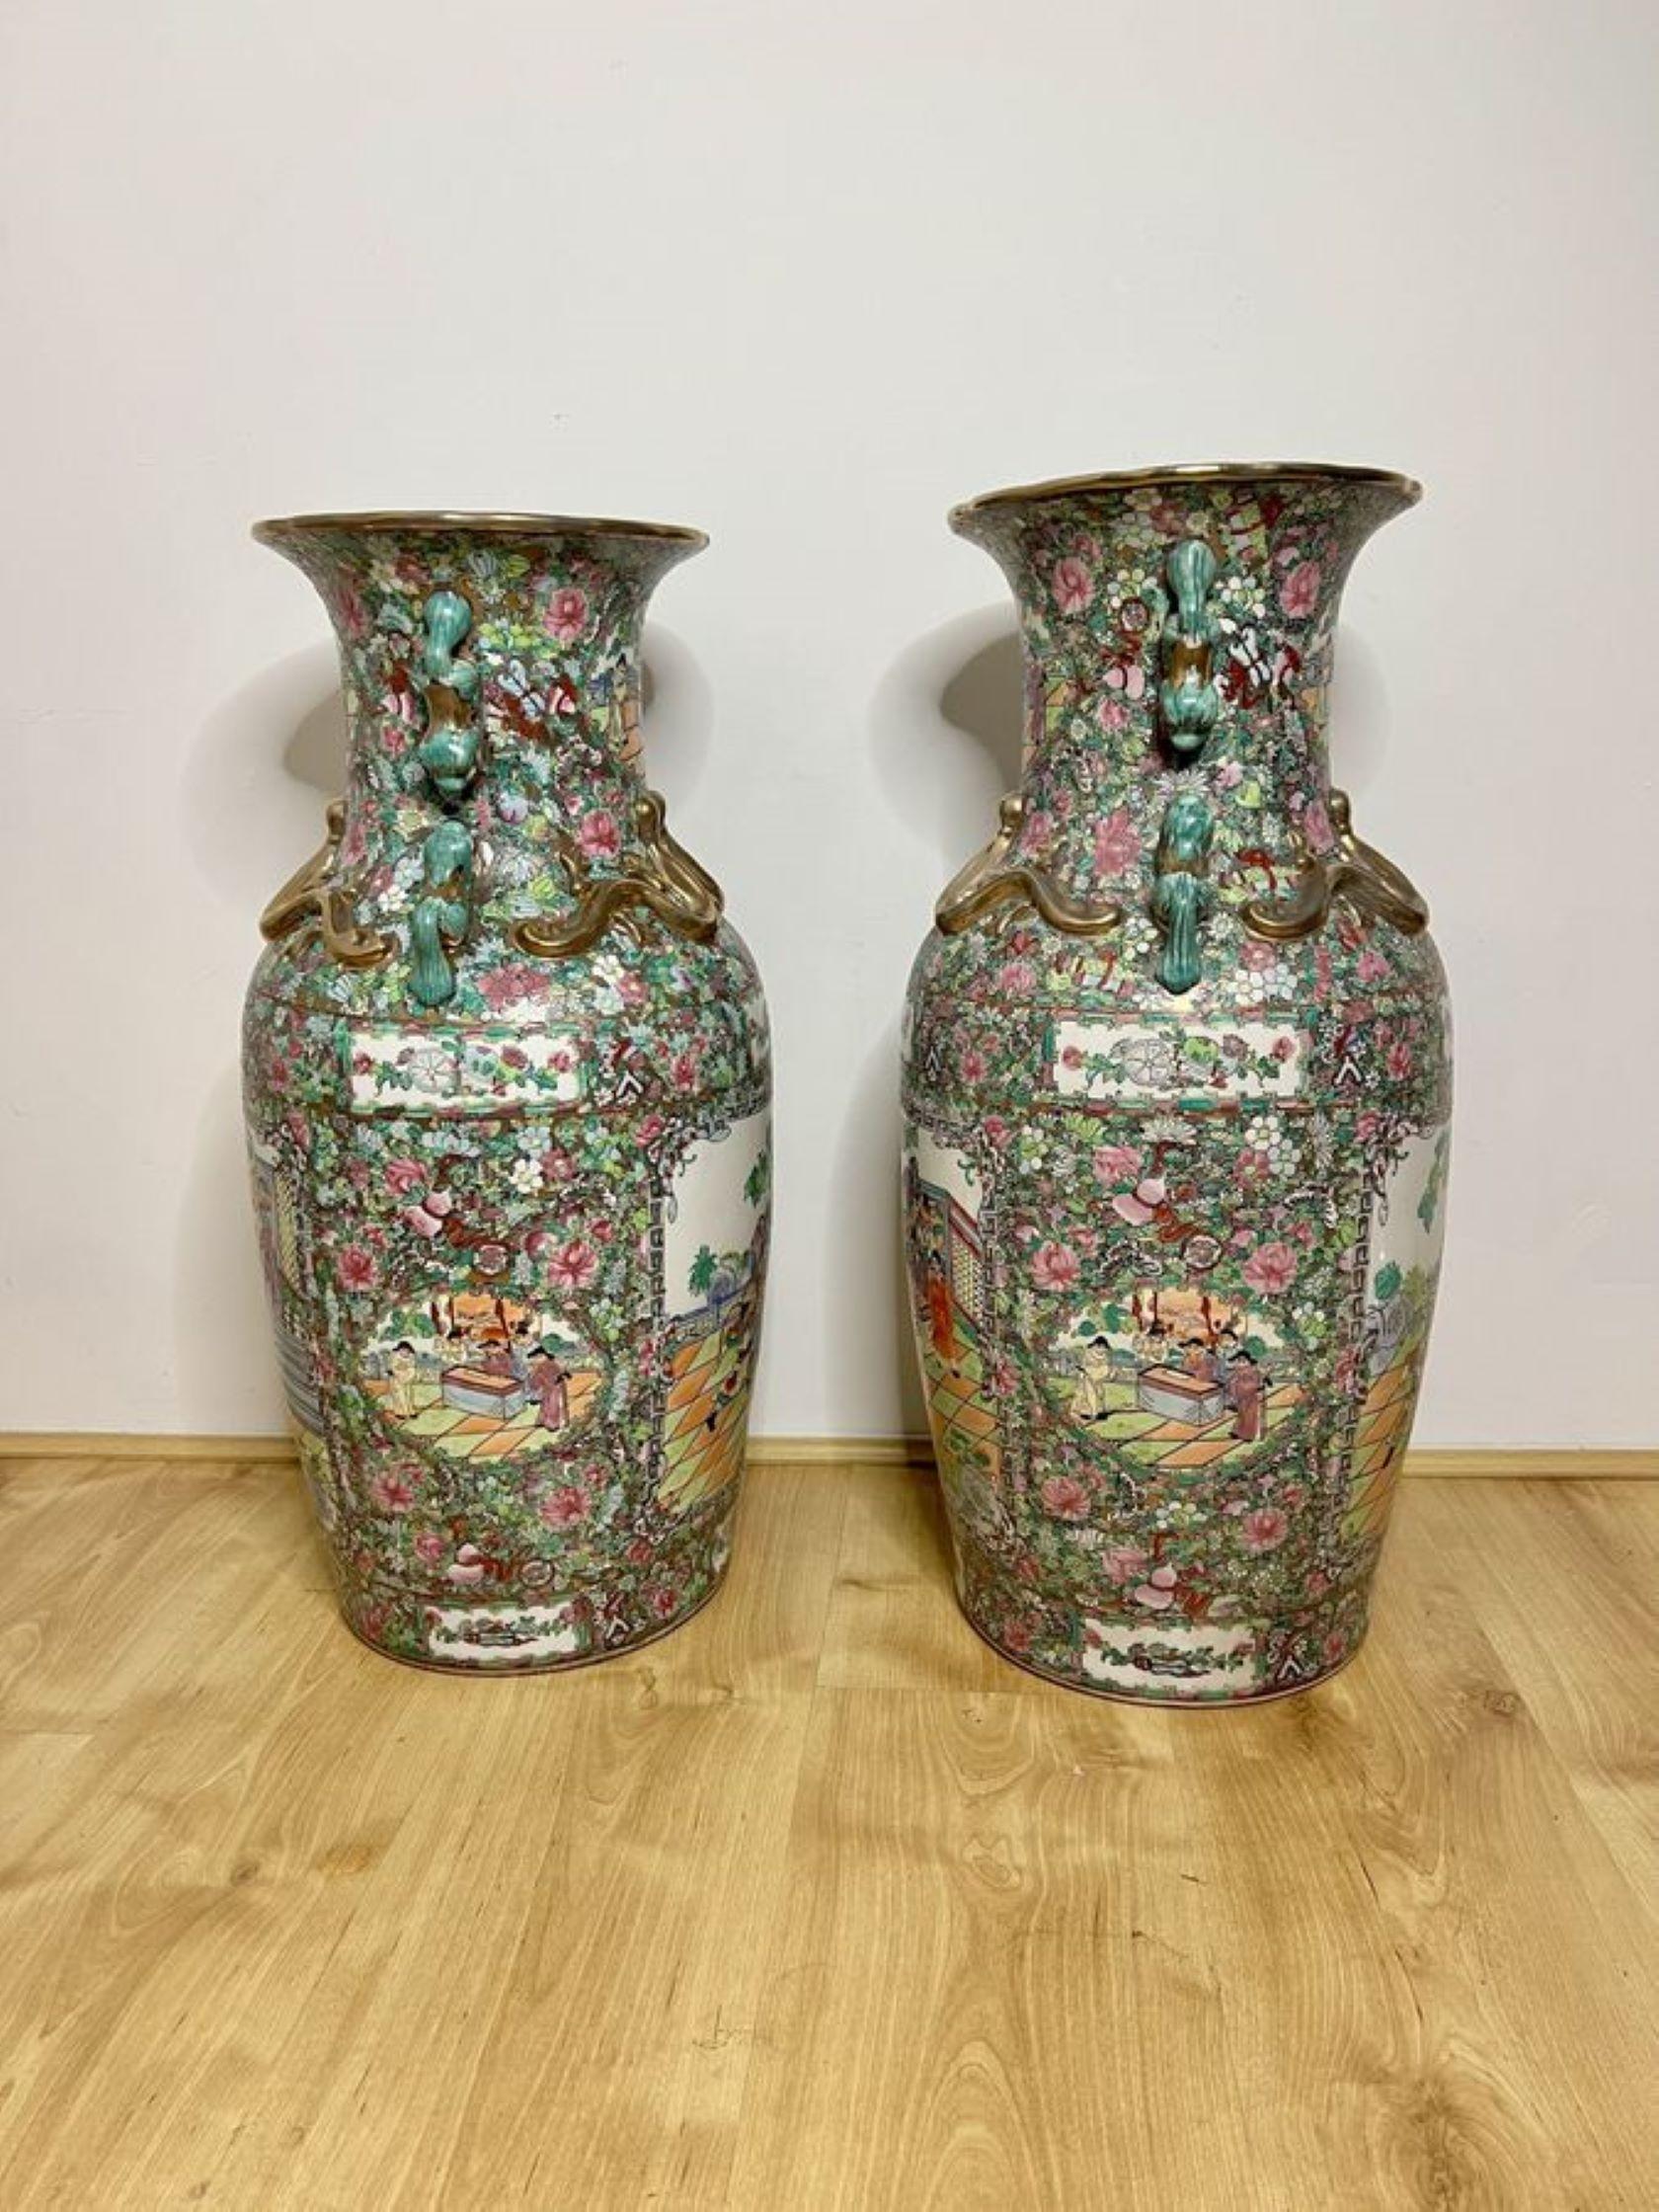 Fantastic pair of antique large Chinese floor standing vases having a pair of large antique Chinese floor standing vases, fantastic decoration in canton style in wonderful green, pink, blue, red and white colours, having twin dragon handles to the